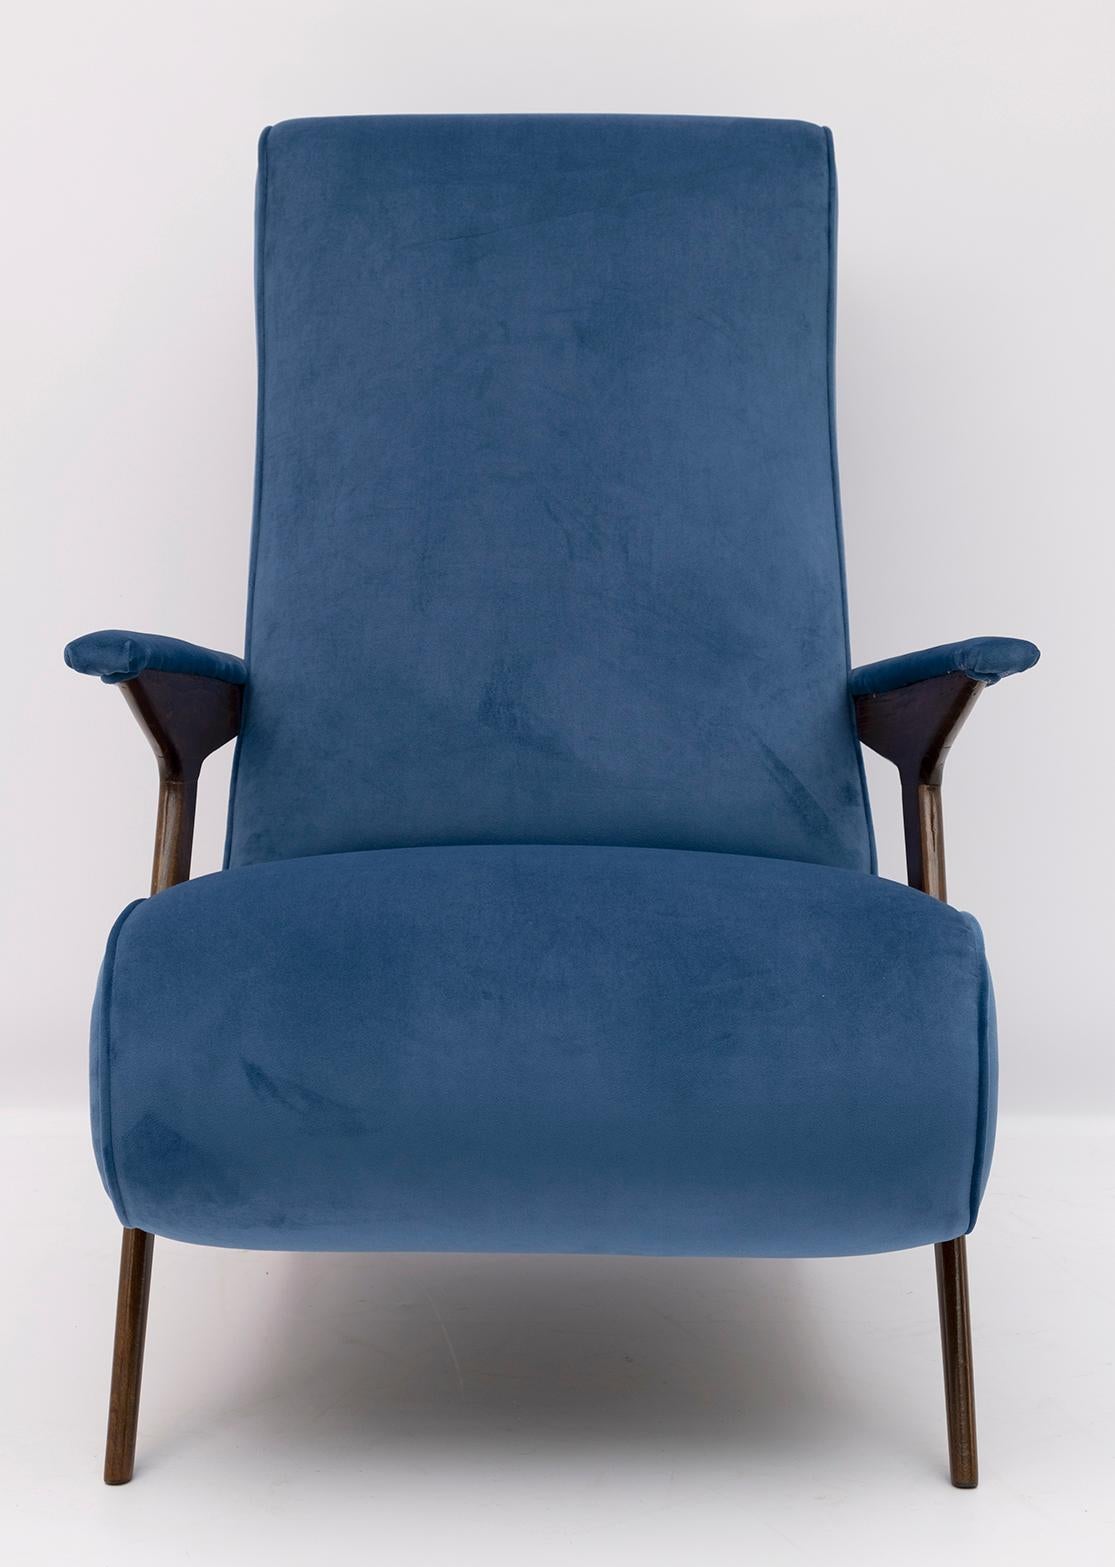 This particular Italian armchair, by an unknown designer, has been restored and upholstered in blue velvet. Armchair from the 1950s.